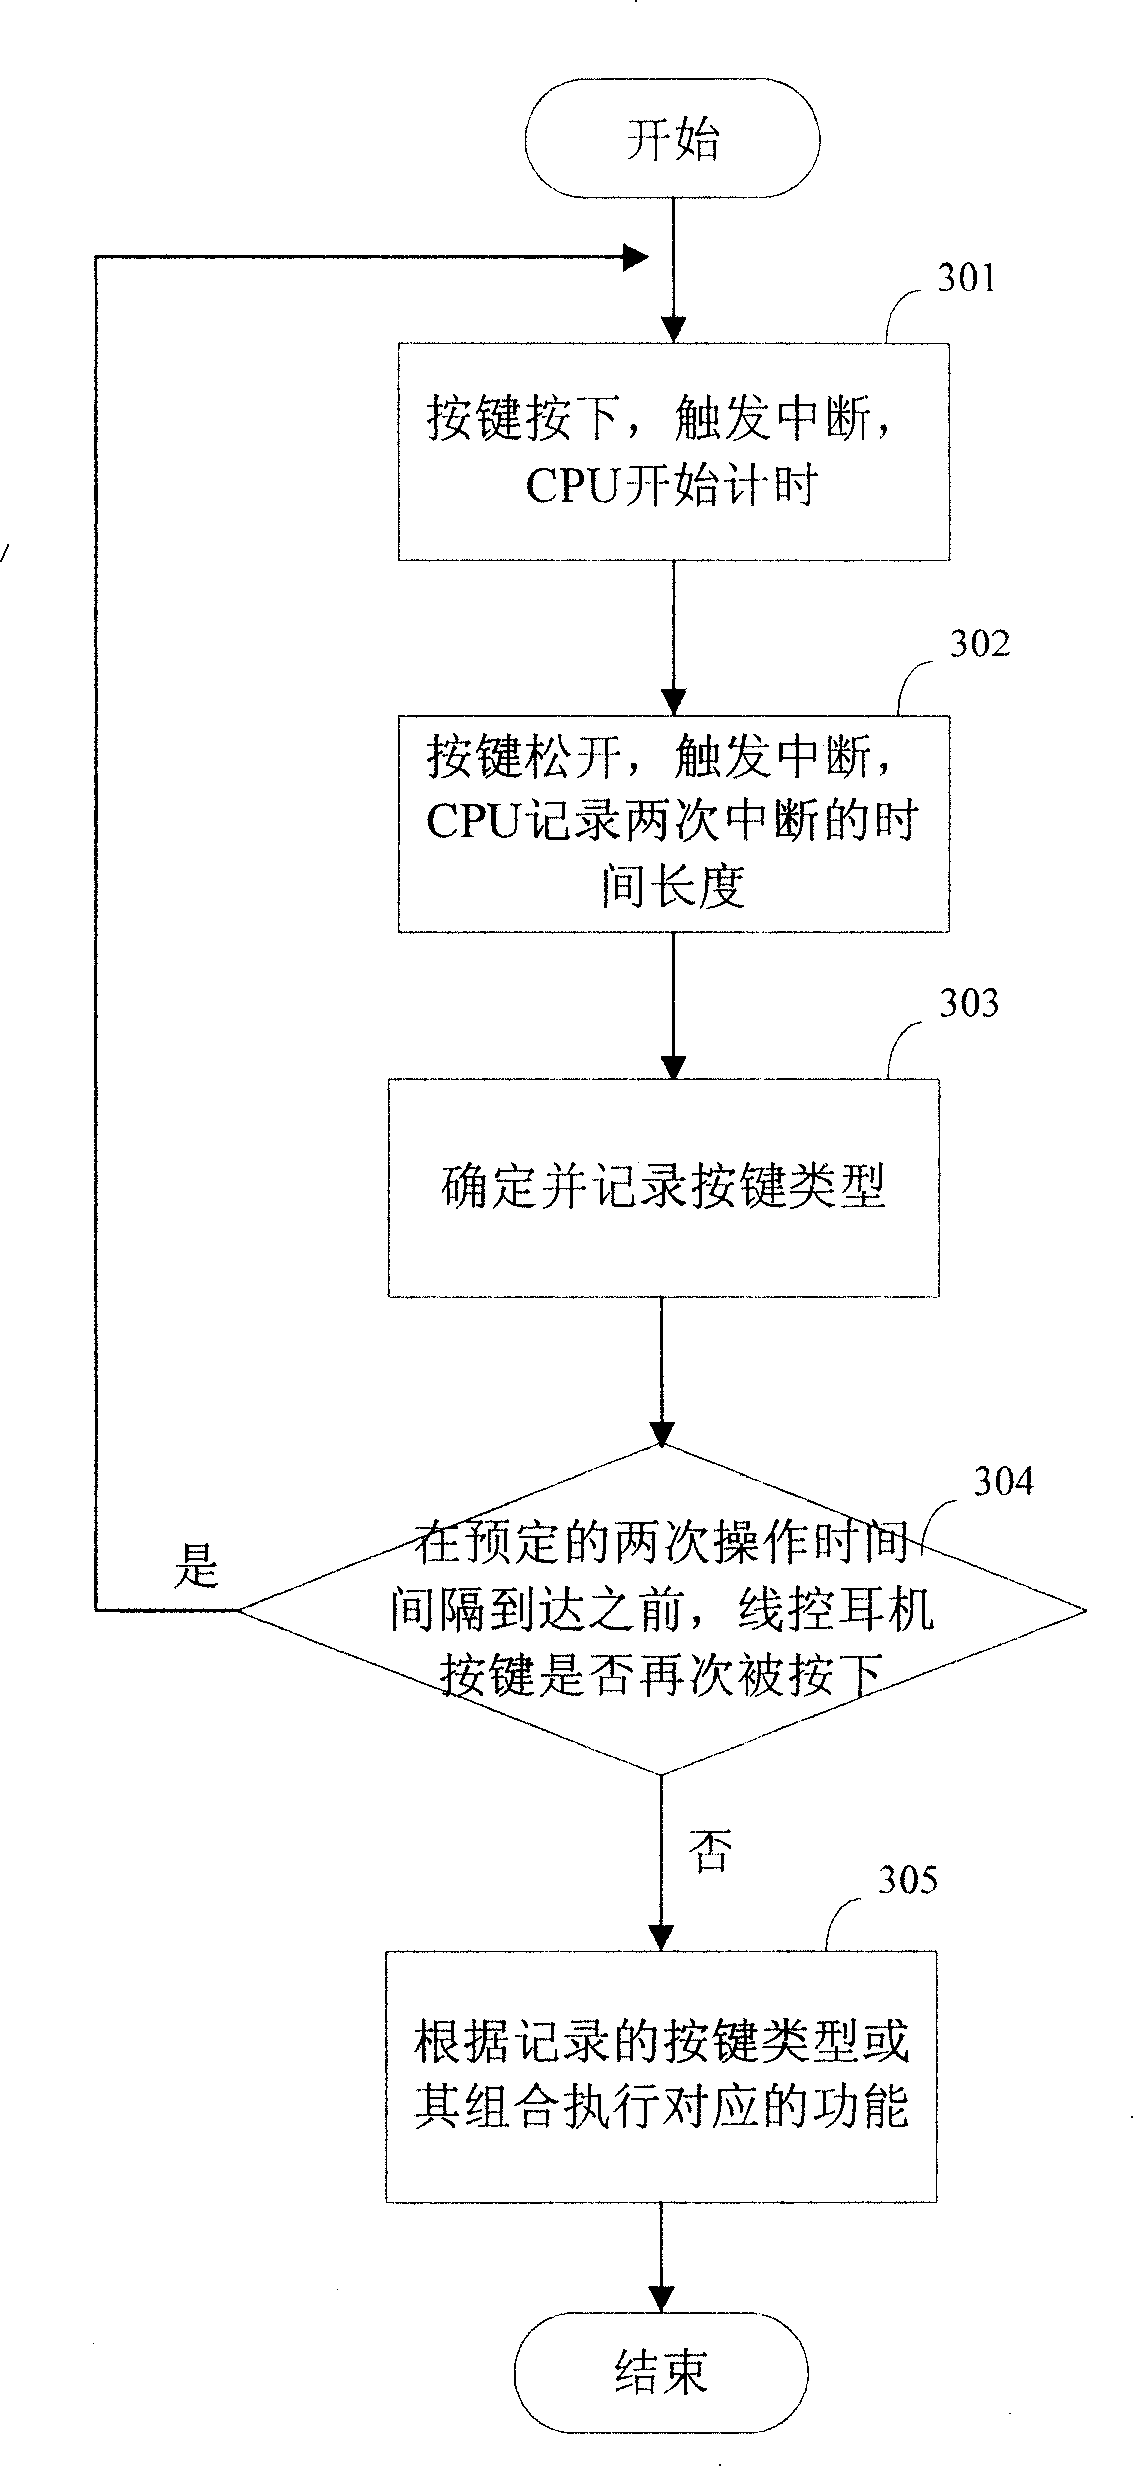 Portable electronic apparatus and its line traffic control accomplishing method